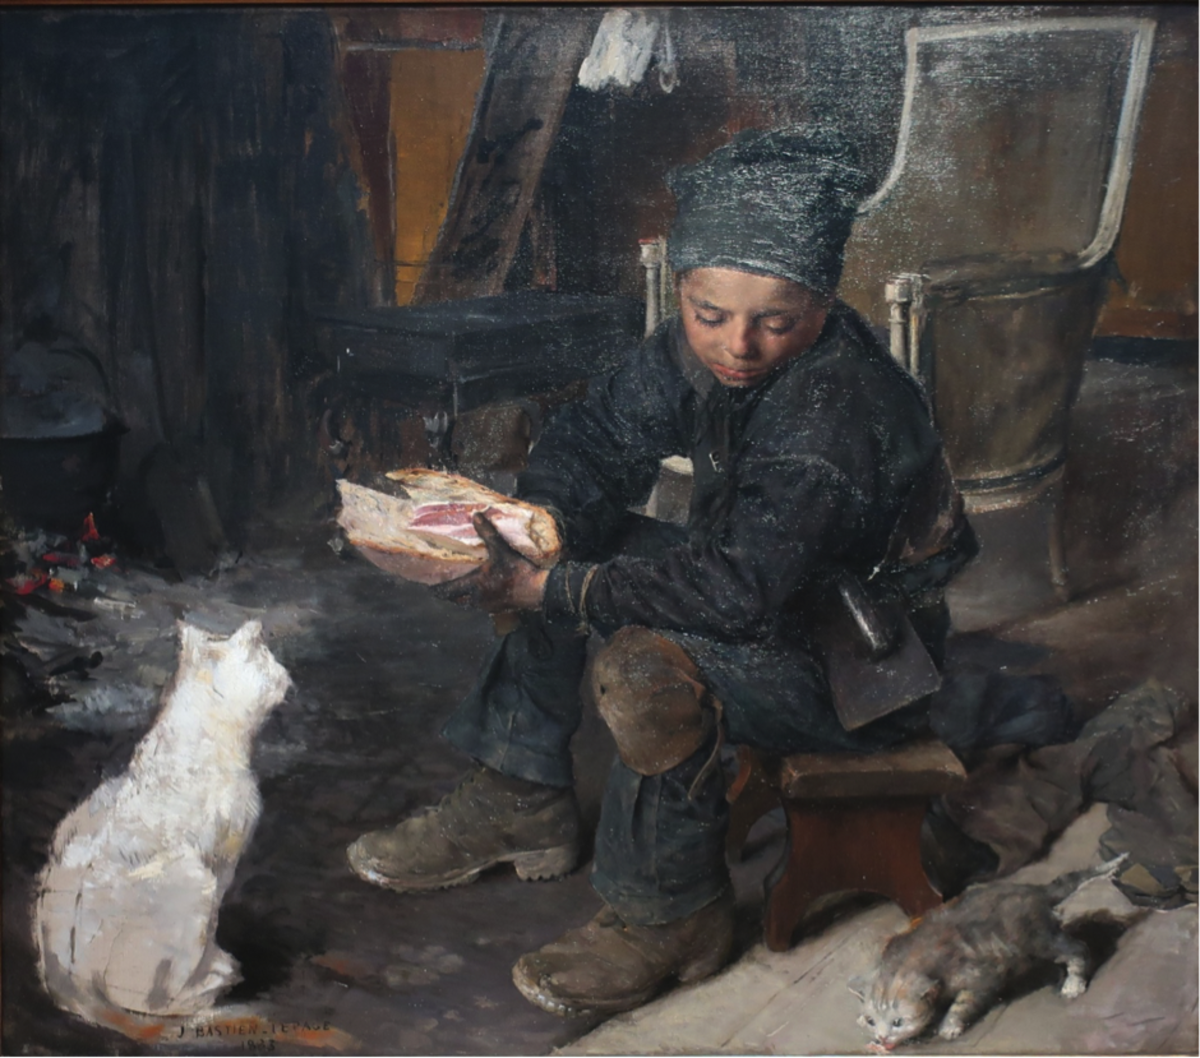 1883. The Little Chimney Sweep, oil on canvas, Jules Bastien-Lepage